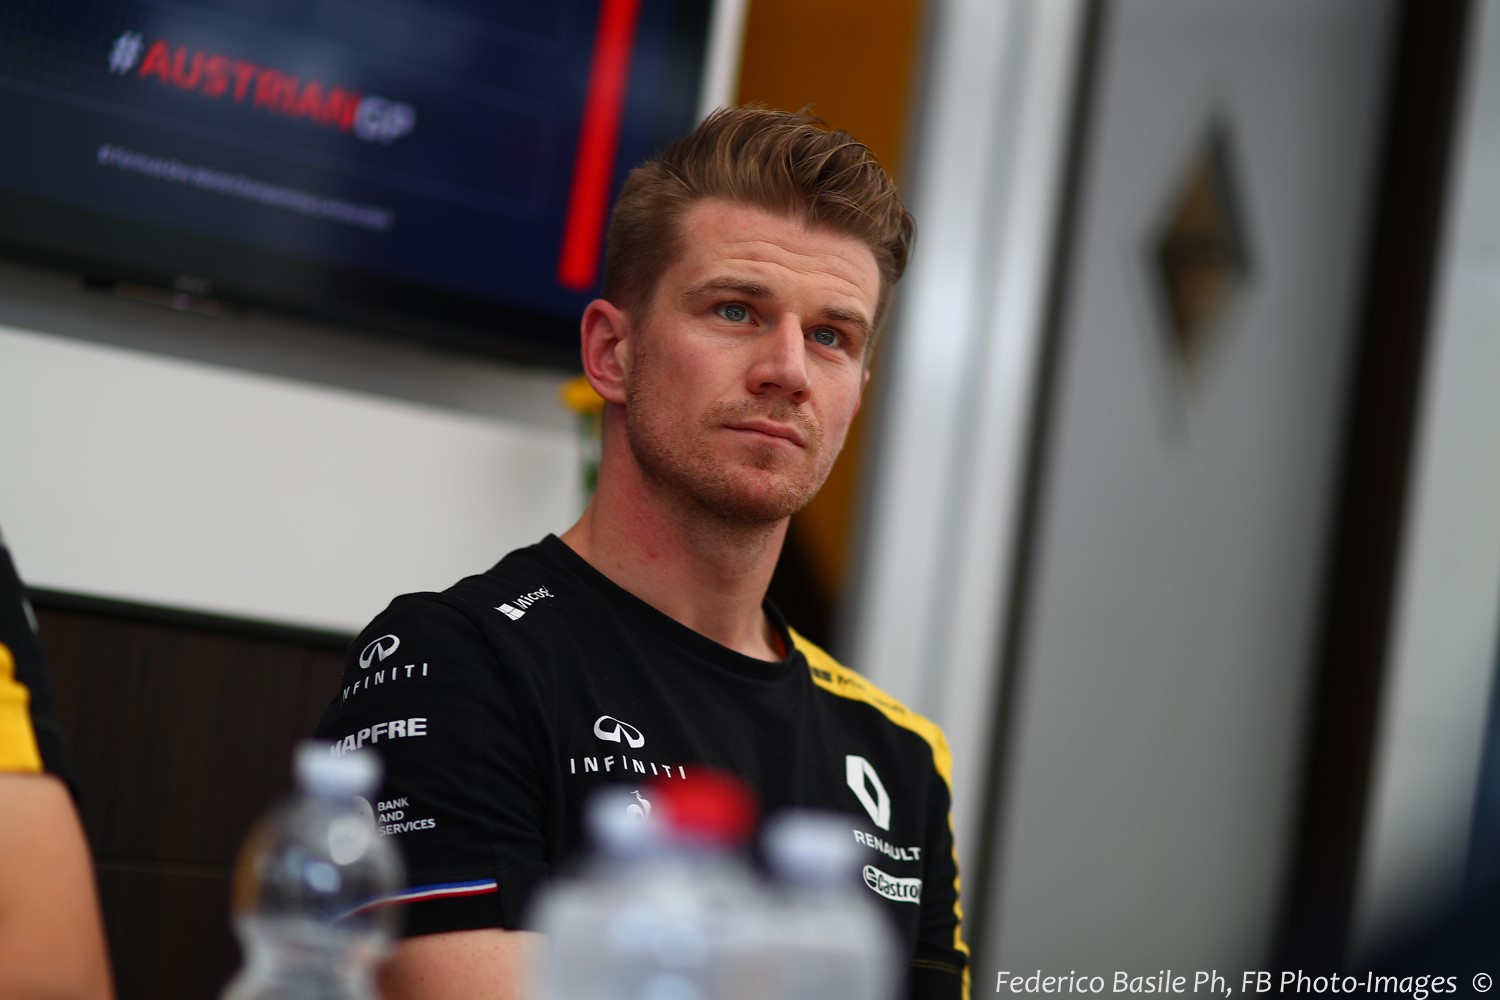 Hulkenberg prefers to stay home and weed his garden